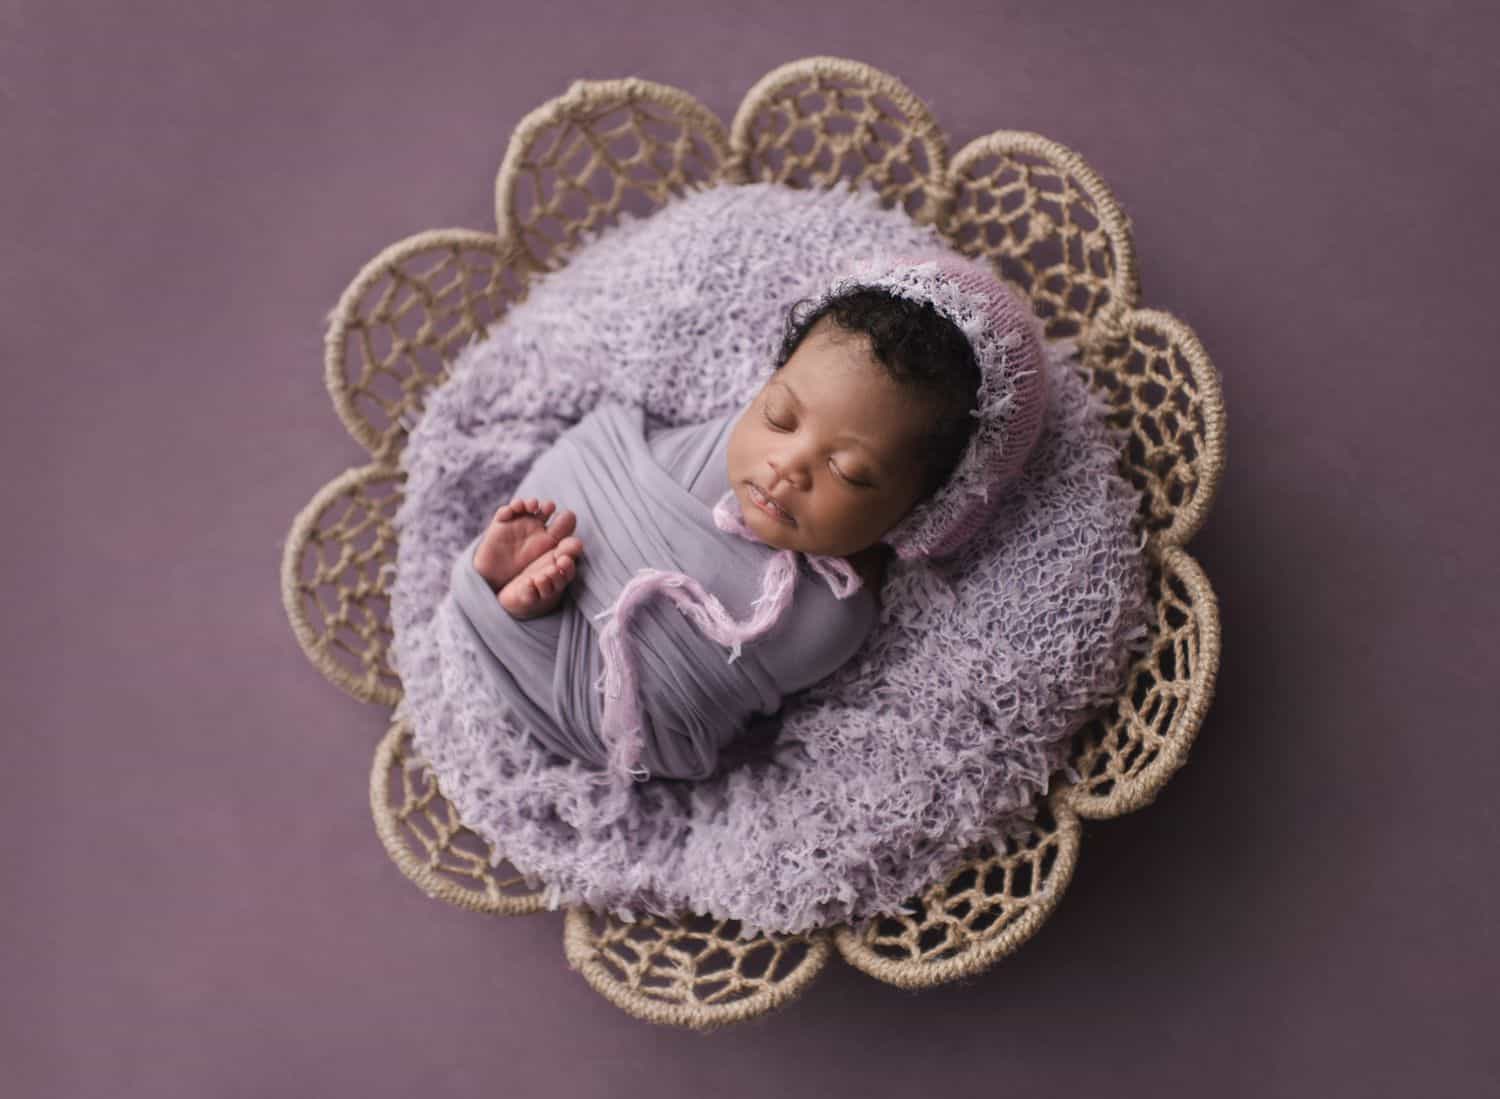 Photographers who specialize are now the gold standard for clients wanting the best newborn photographs, wedding photographs, and more. Here's why. (Featuring Chaya Braun)